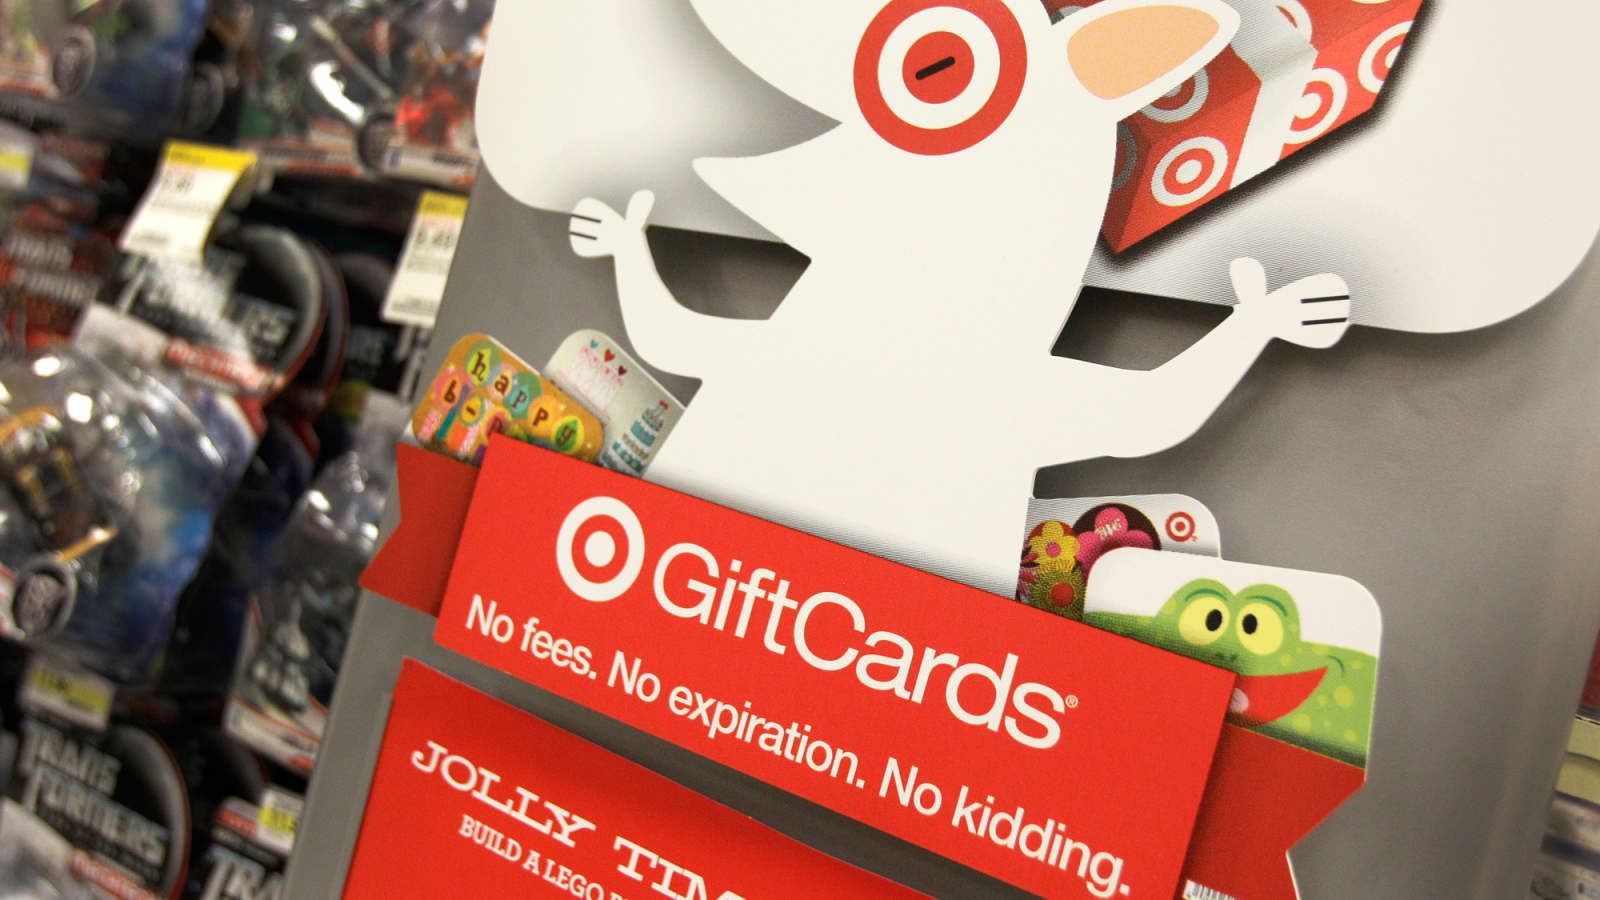 Some Target Holiday Gift Cards Were Not Activated - can you buy roblox gift cards at target